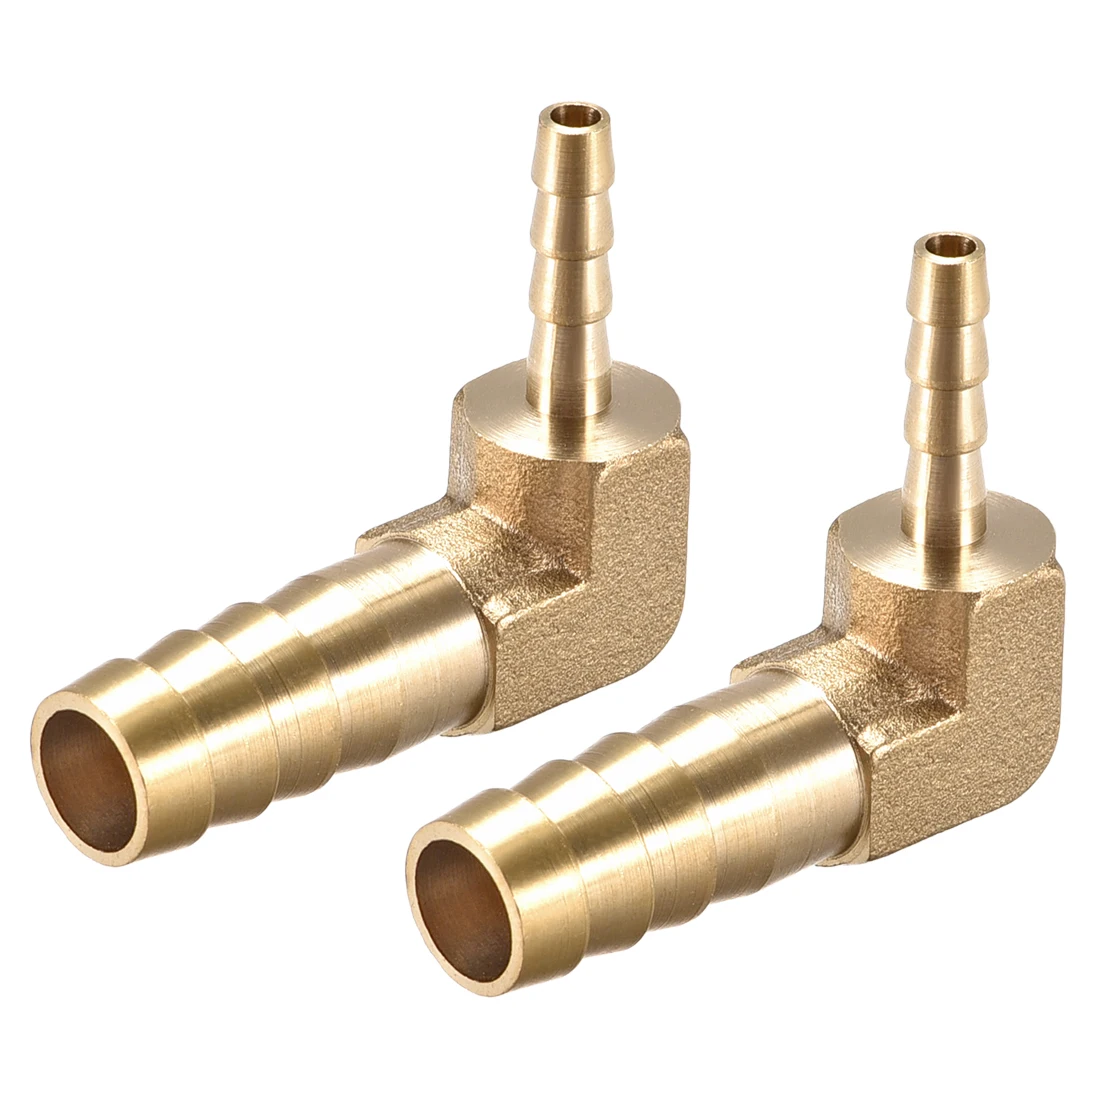 

uxcell 2pcs 10mm To 4mm Barb Brass Hose Fitting 90 Degree Elbow Pipe Connector Coupler Tubing Adapter for air, water, fuel